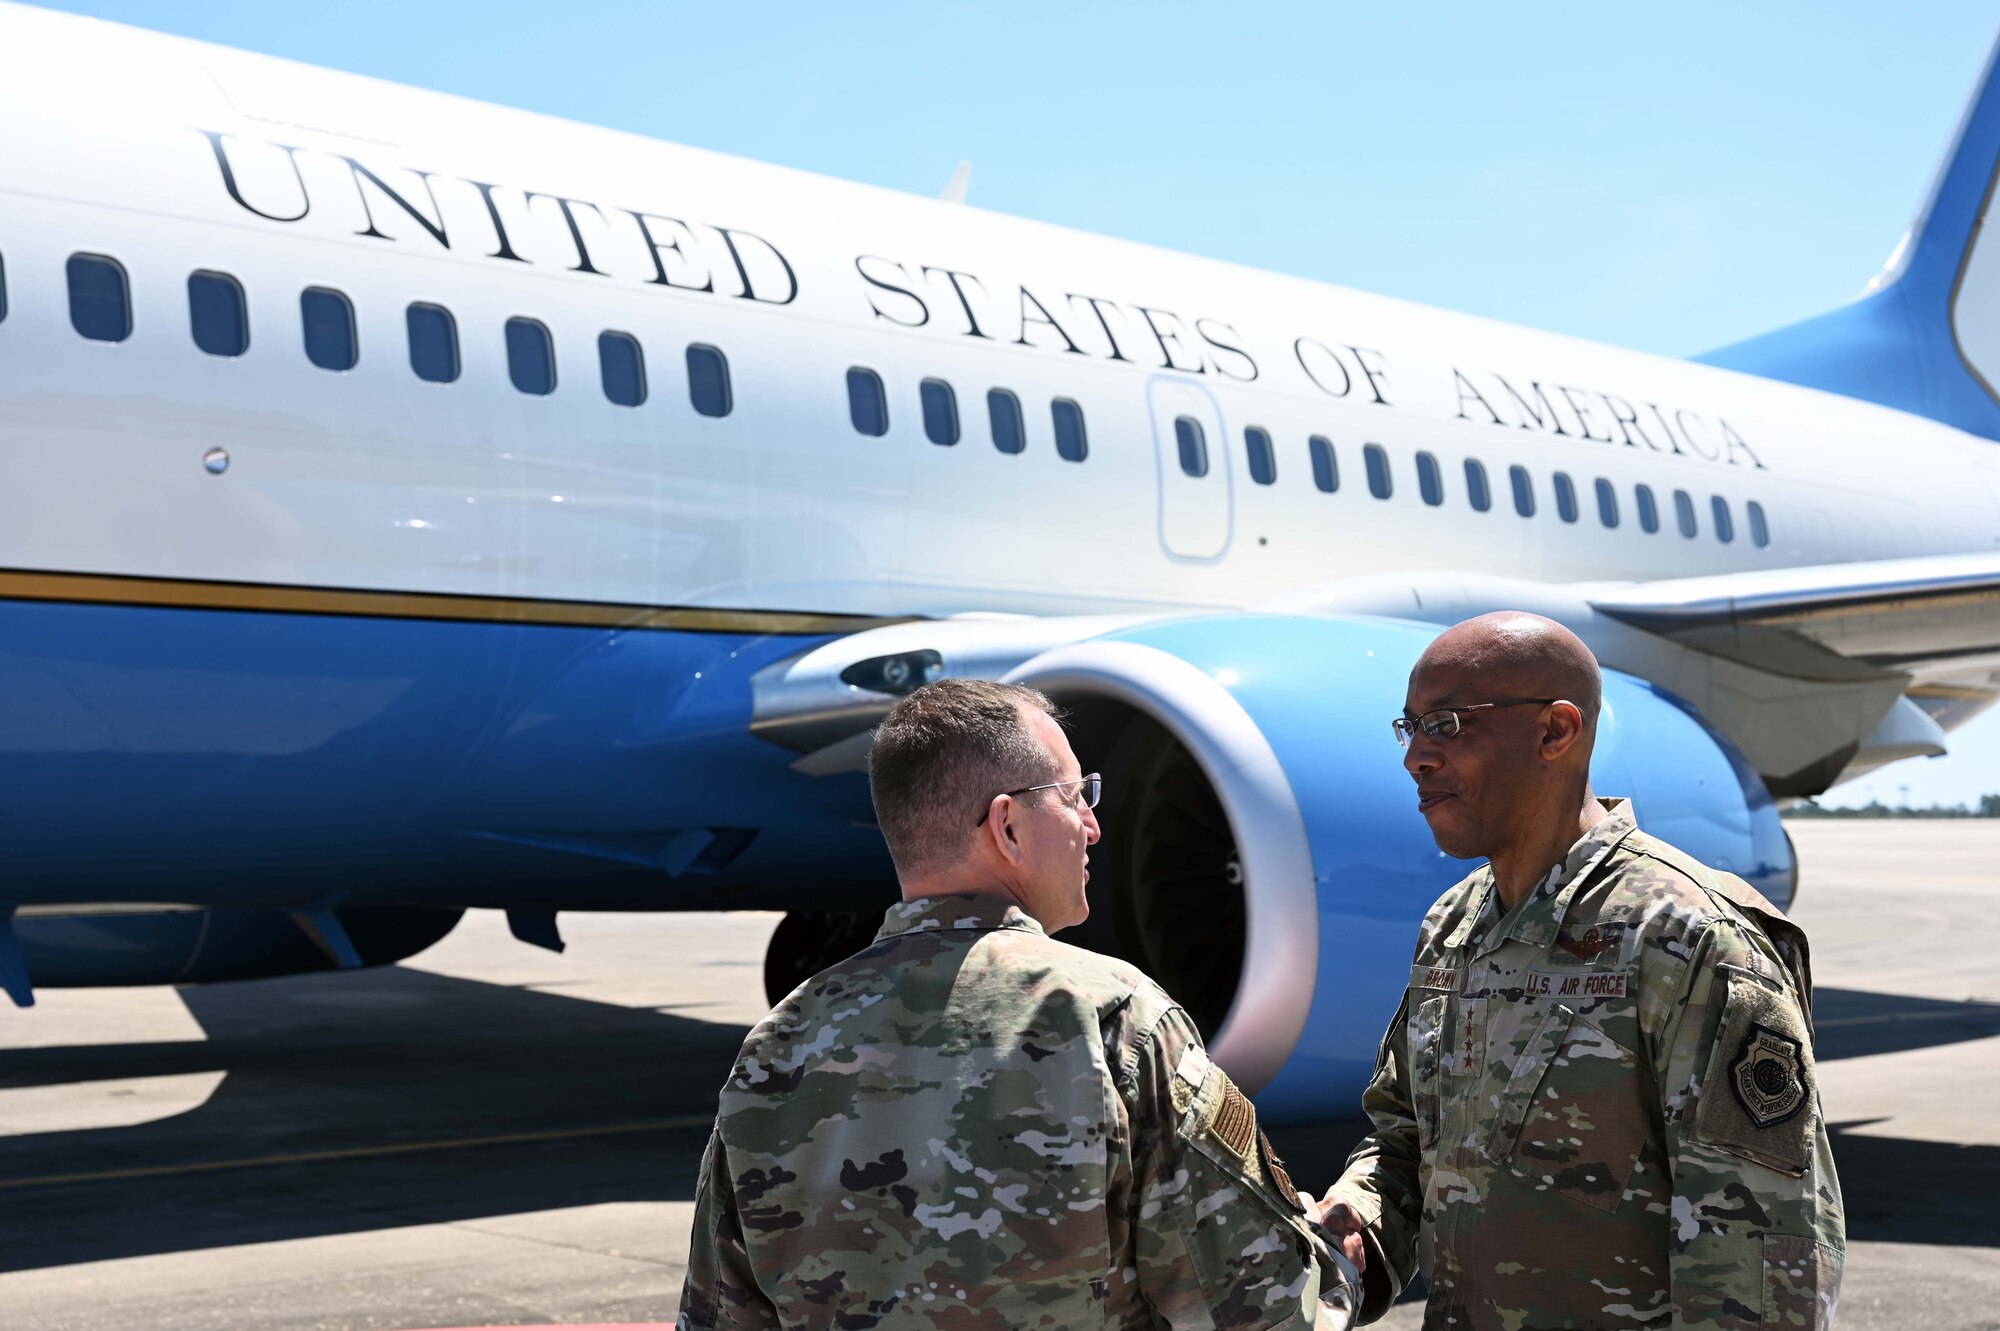 Air Force Chief of Staff Gen. CQ Brown, Jr., talks with Lt. Gen. Jim Slife, commander of Air Force Special Operations Command, before departing Hurlburt Field, Fla., April 4, 2022. During his visit, Brown met with junior enlisted Airmen and received command updates from Headquarters AFSOC staff and briefings on Mission Sustainment Teams, Aviation Special Operations Task Units and Special Operations Task Groups. (U.S. Air Force photo by Staff Sgt. Brandon Esau)